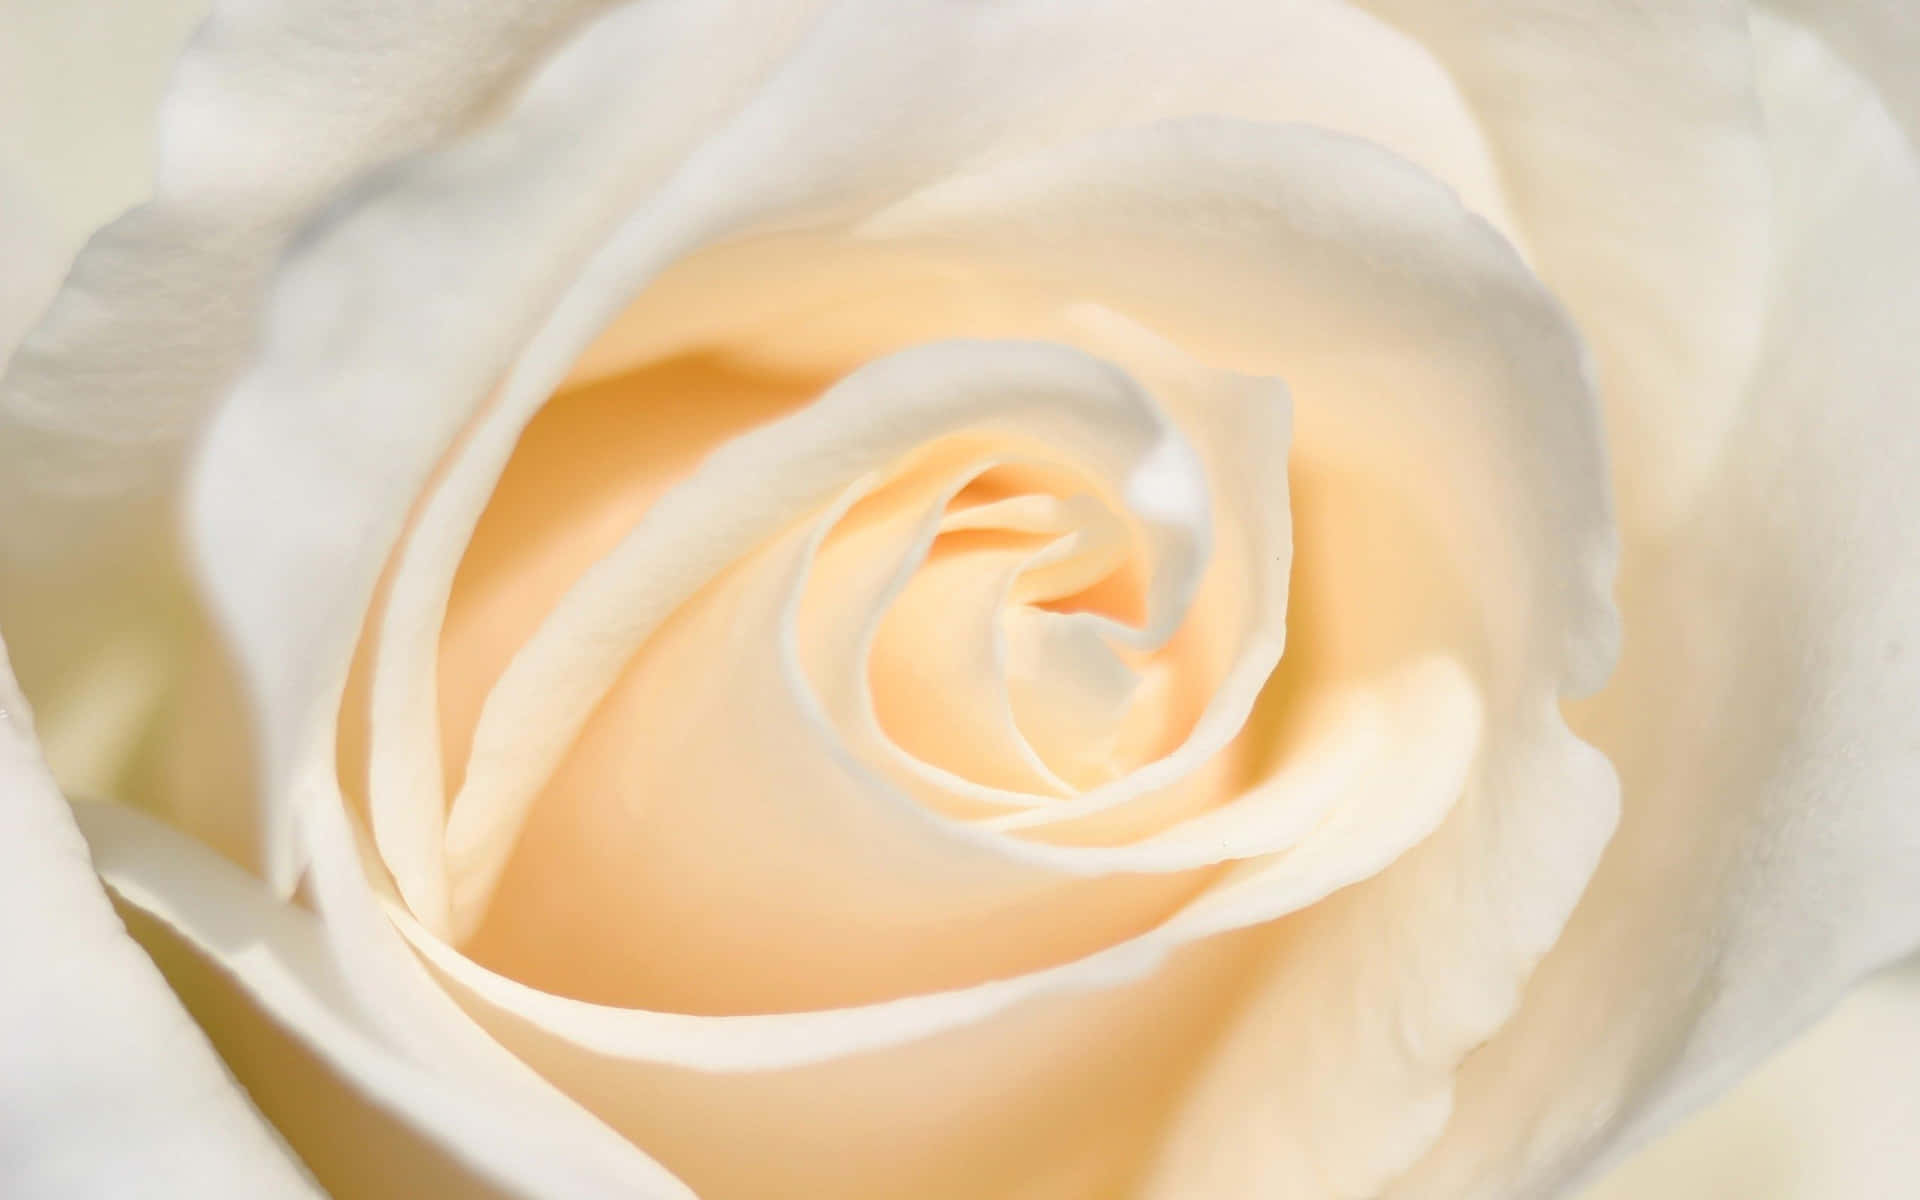 “white Rose: A Symbol Of Innocence And Purity”